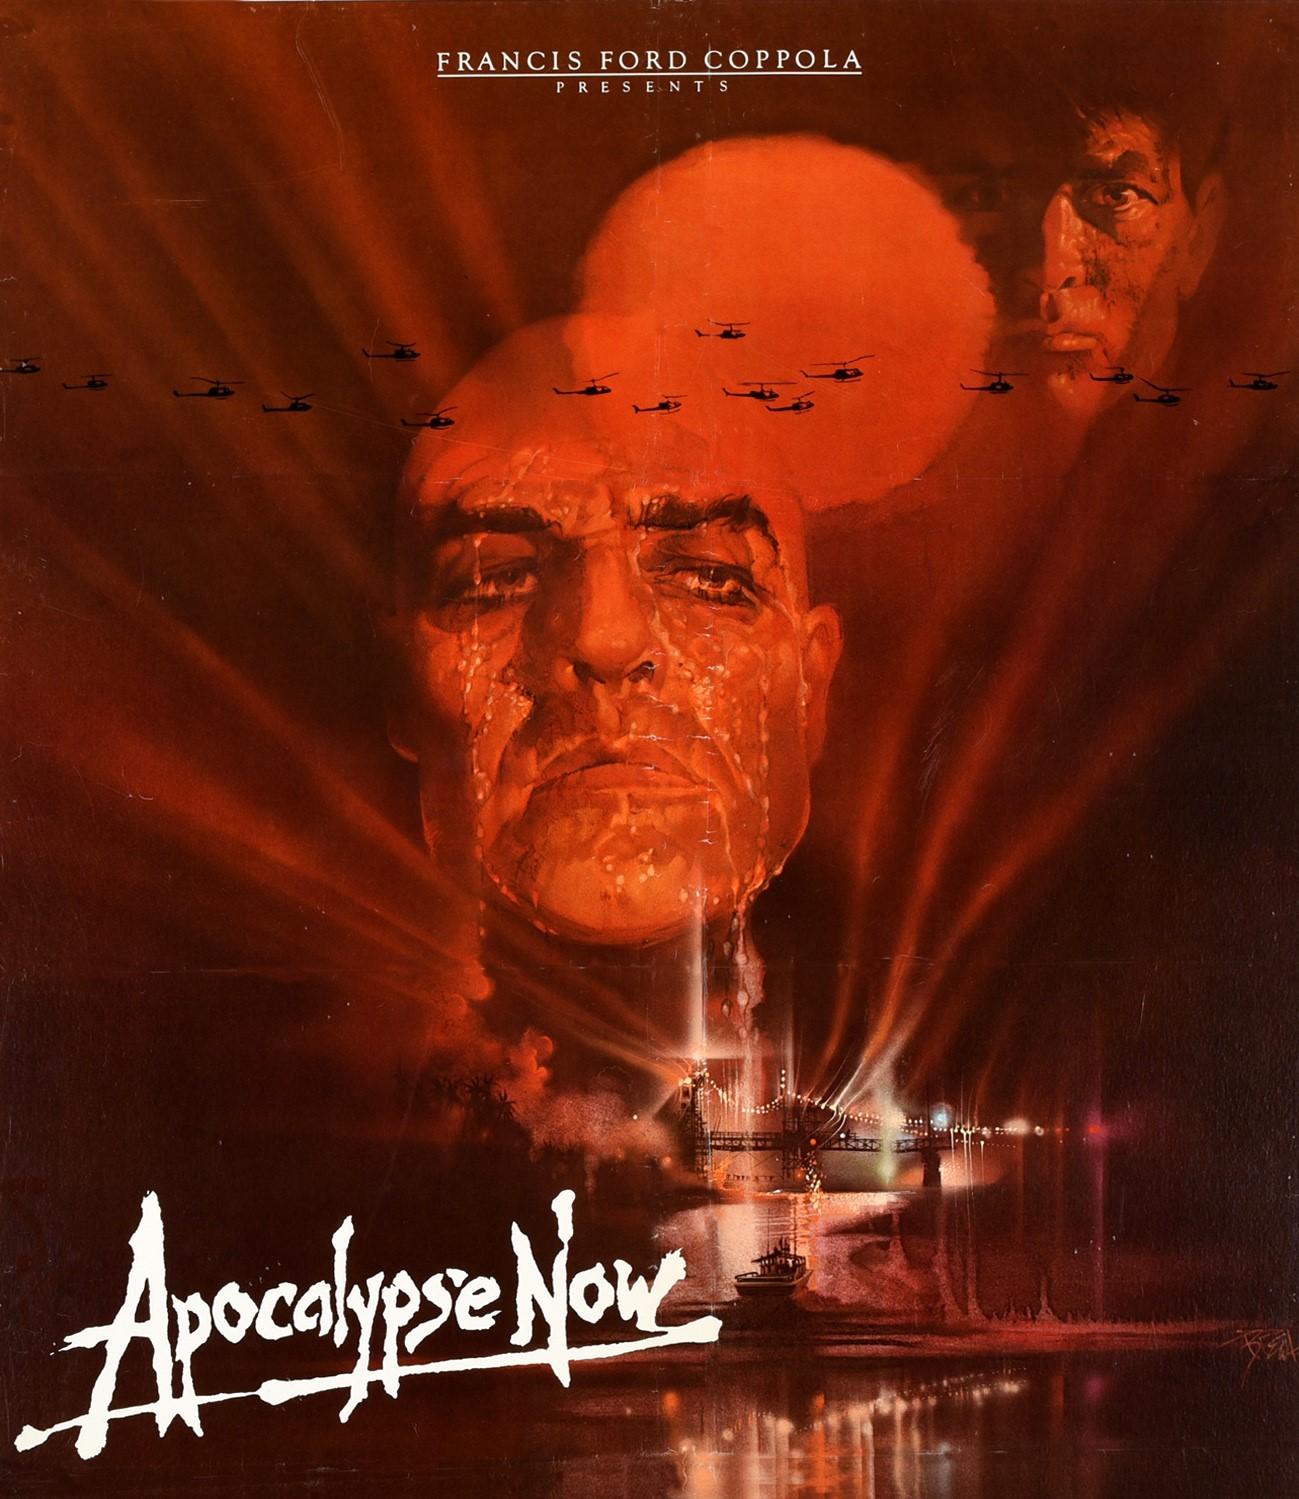 Original vintage movie poster for the Francis Ford Coppola film set during the Vietnam War - Apocalypse Now - starring Martin Sheen, Marlon Brando and Robert Duvall. Classic image featuring military helicopters flying in front of a red sunset with